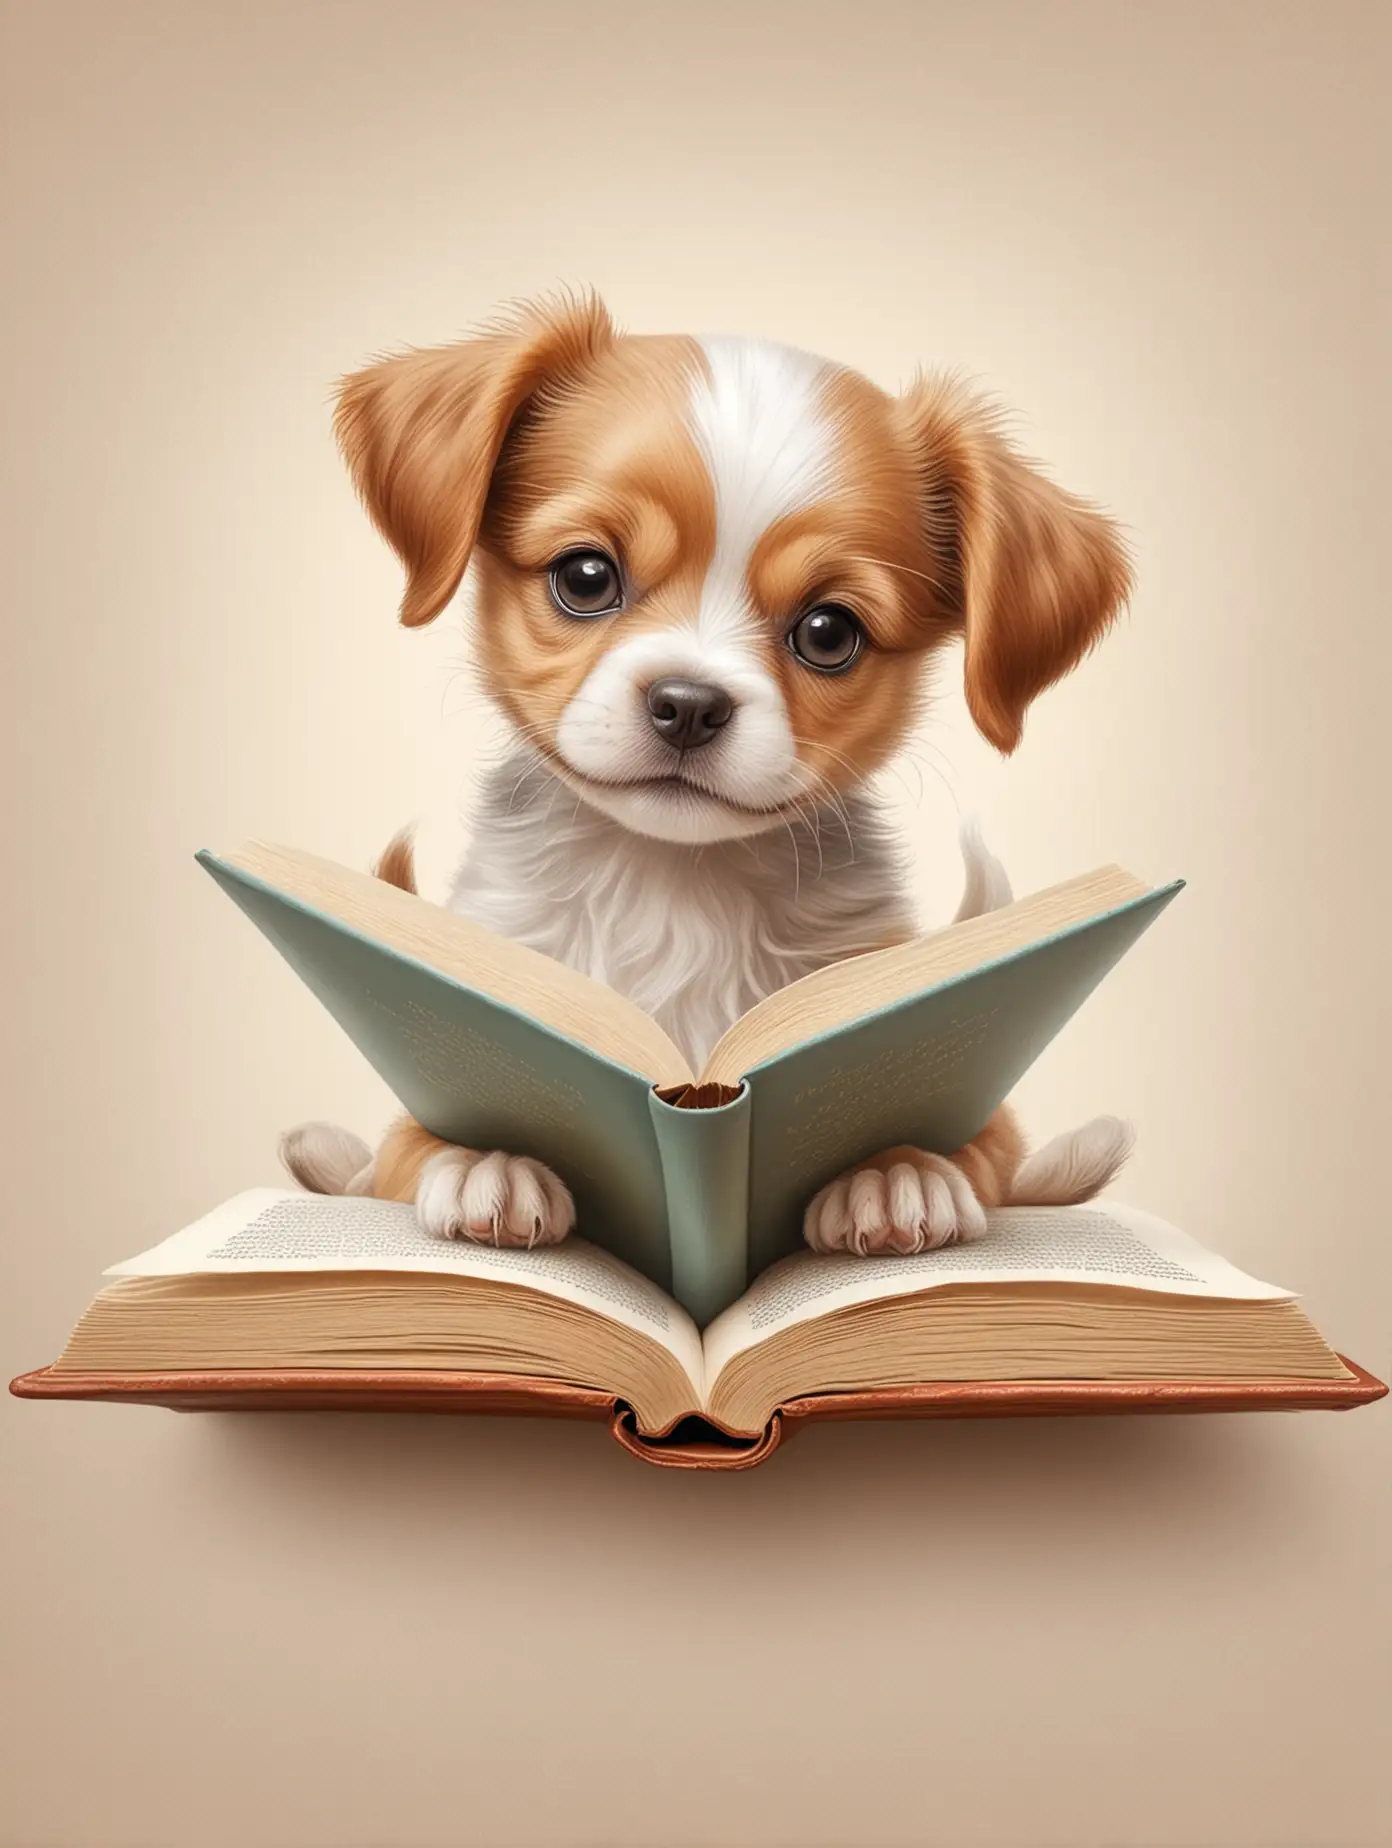 Intricate details, image of a small cute little puppy reading a book, in pastel drawing style, on a blank background